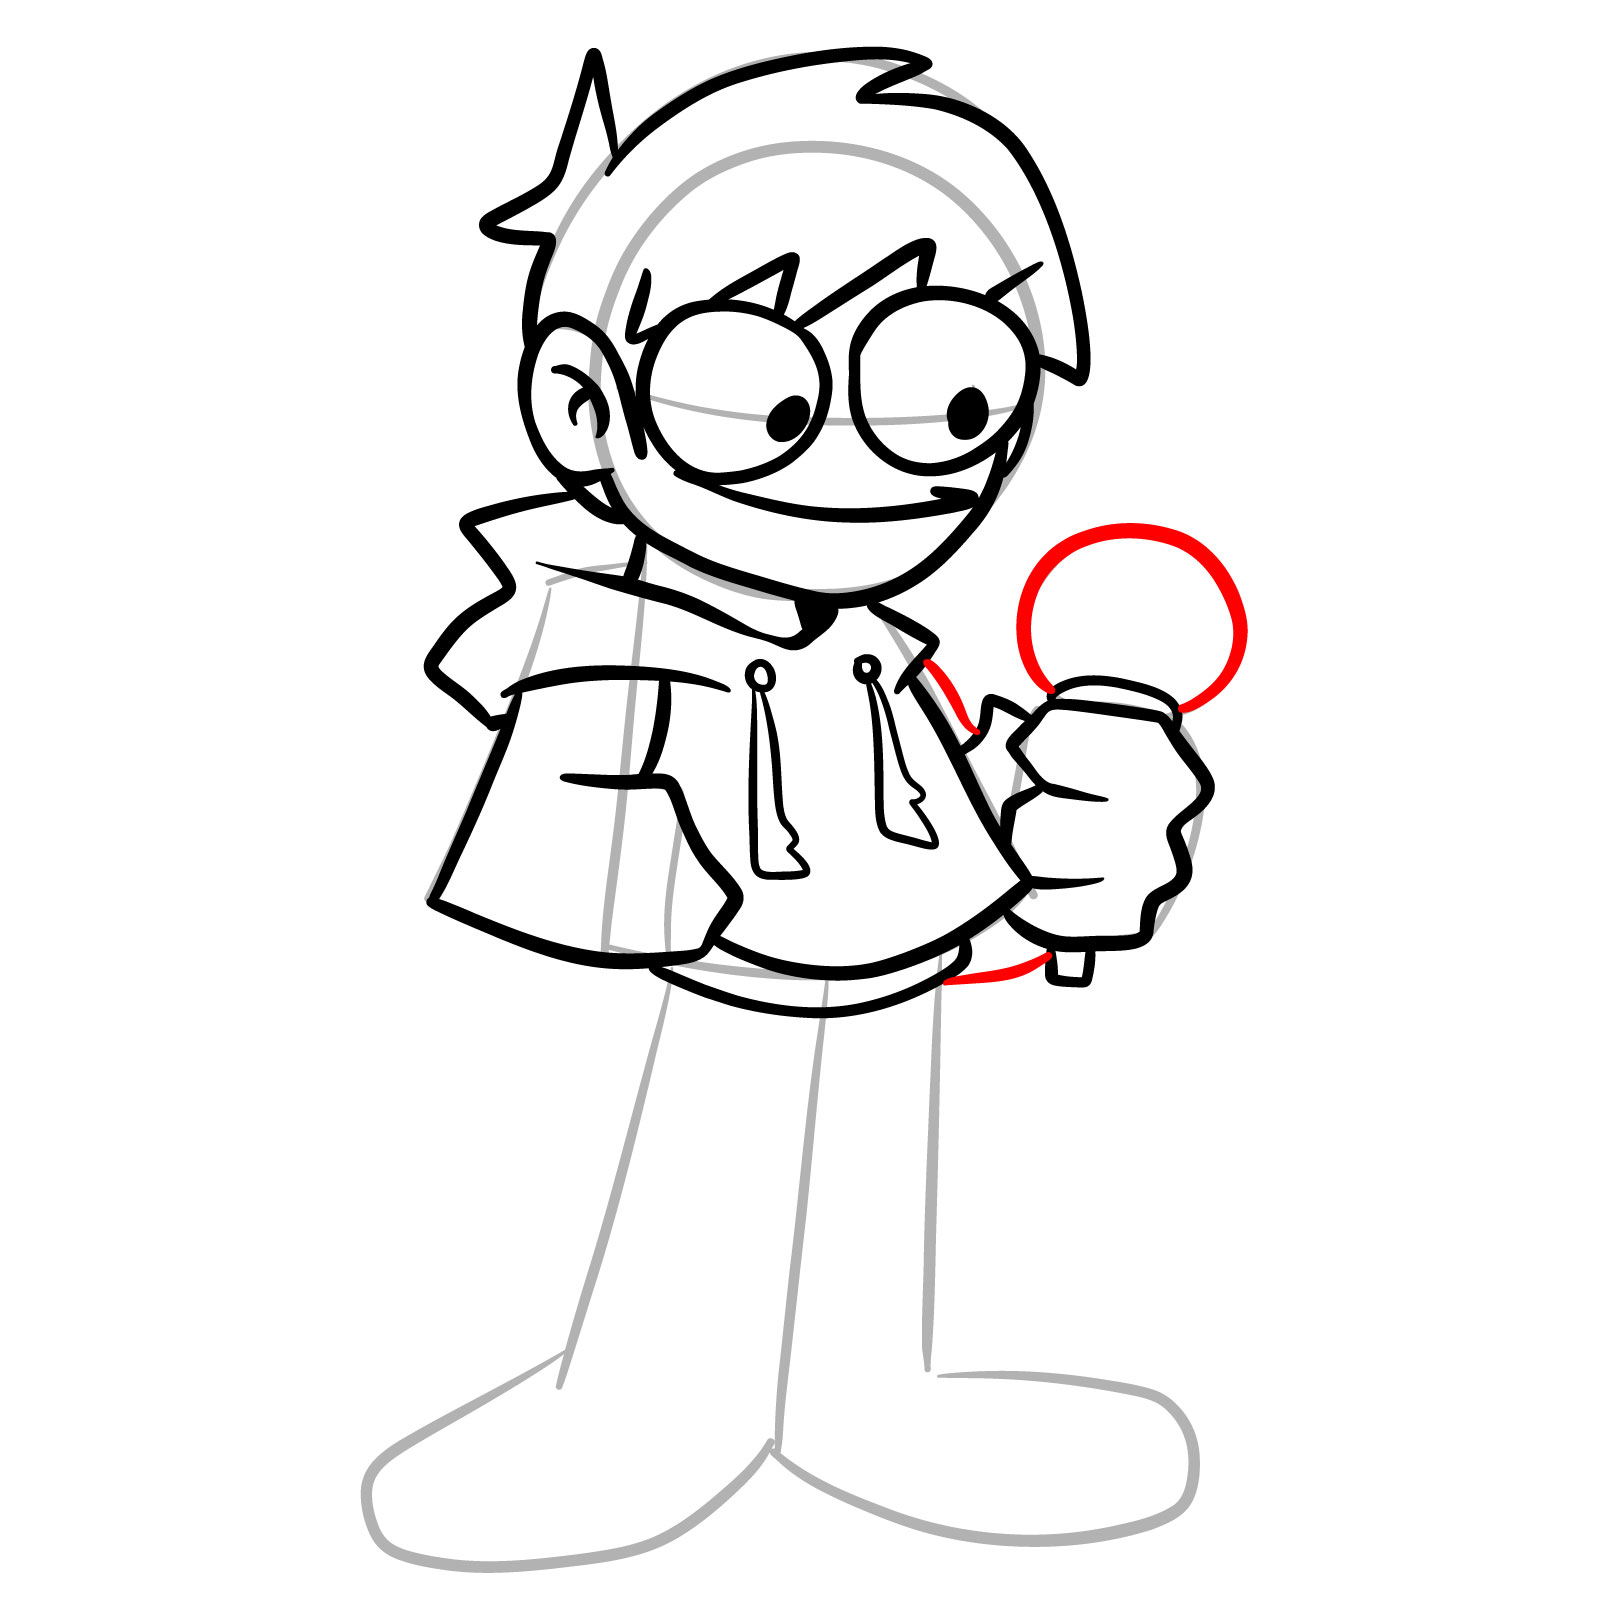 How to draw Edd from Online Vs - step 19